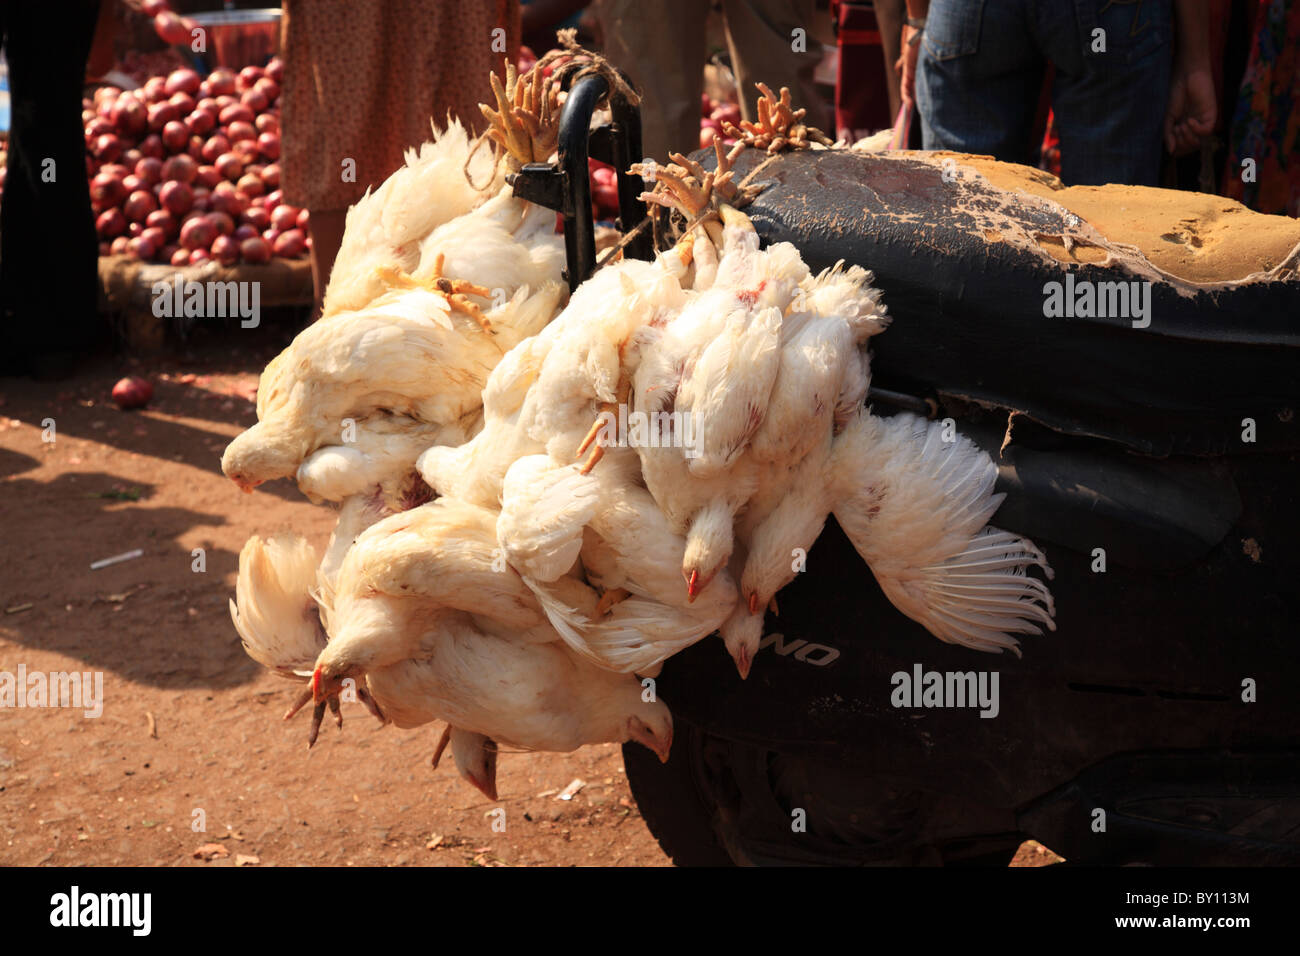 Chickens on the back of a motorbike at a market in India Stock Photo